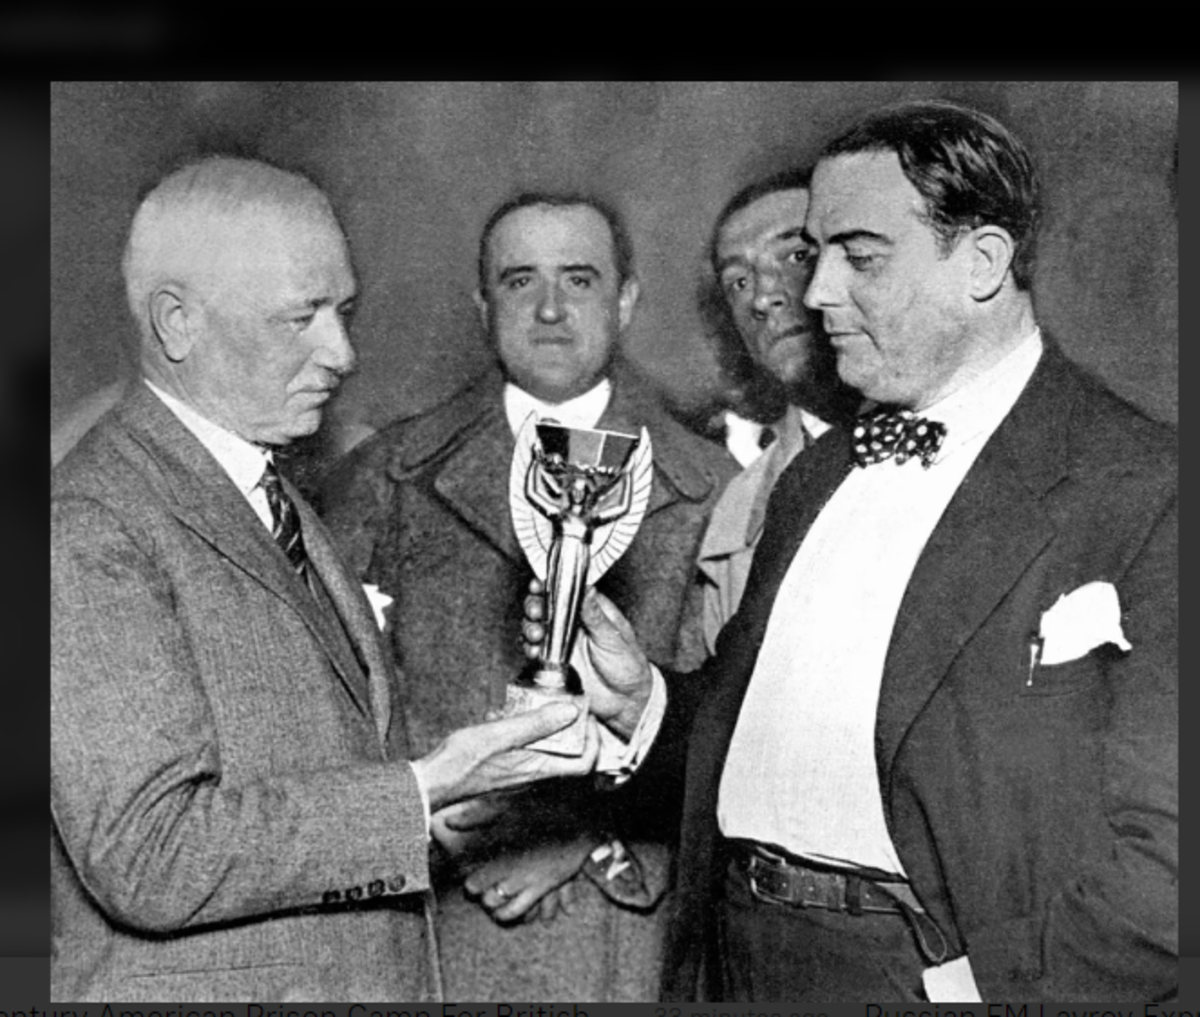 Jules Rimet, president of FIFA, presenting the Jules Rimet trophy to Dr. Raul Jude, president of the Uruguayan football association. The trophy would be presented at the 1930 World Cup finals in Montevideo.